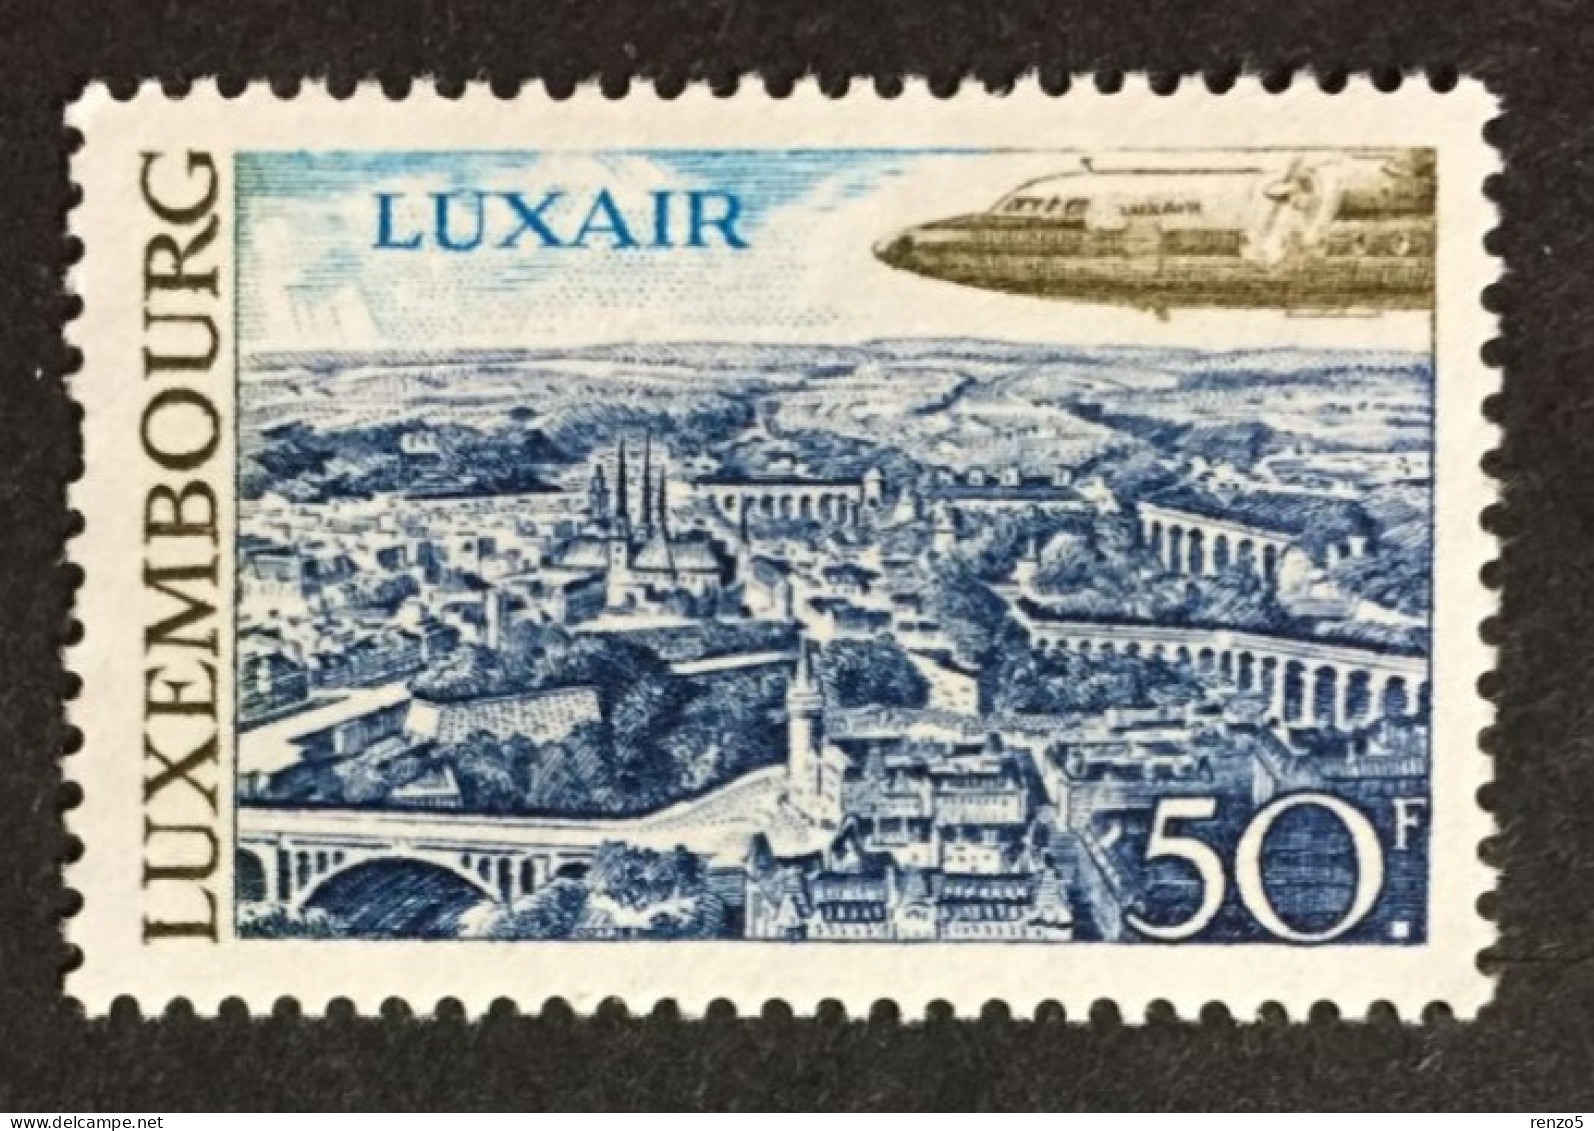 1968 Luxembourg - Tourism Fokker F.27 Friendship Over Luxembourg - Unused ( Imperfect Gum ) - Nuevos